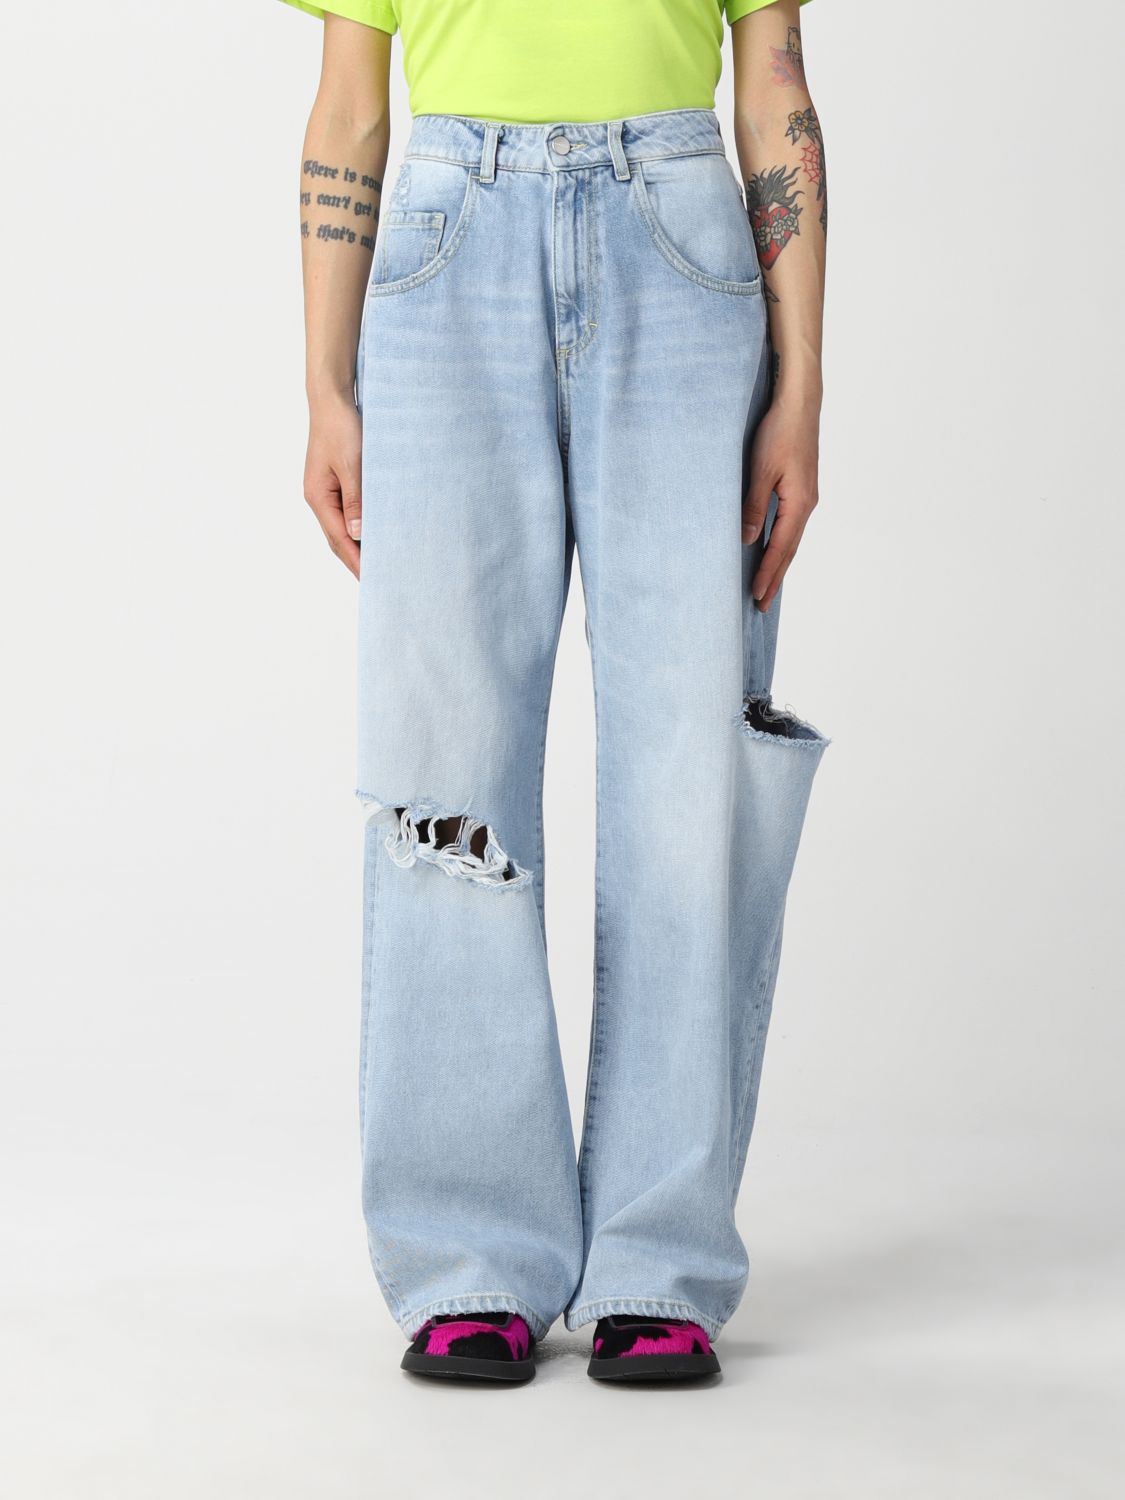 Jeans Icon Denim Los Angeles: Icon Denim Los Angeles jeans in ripped denim stone washed 1